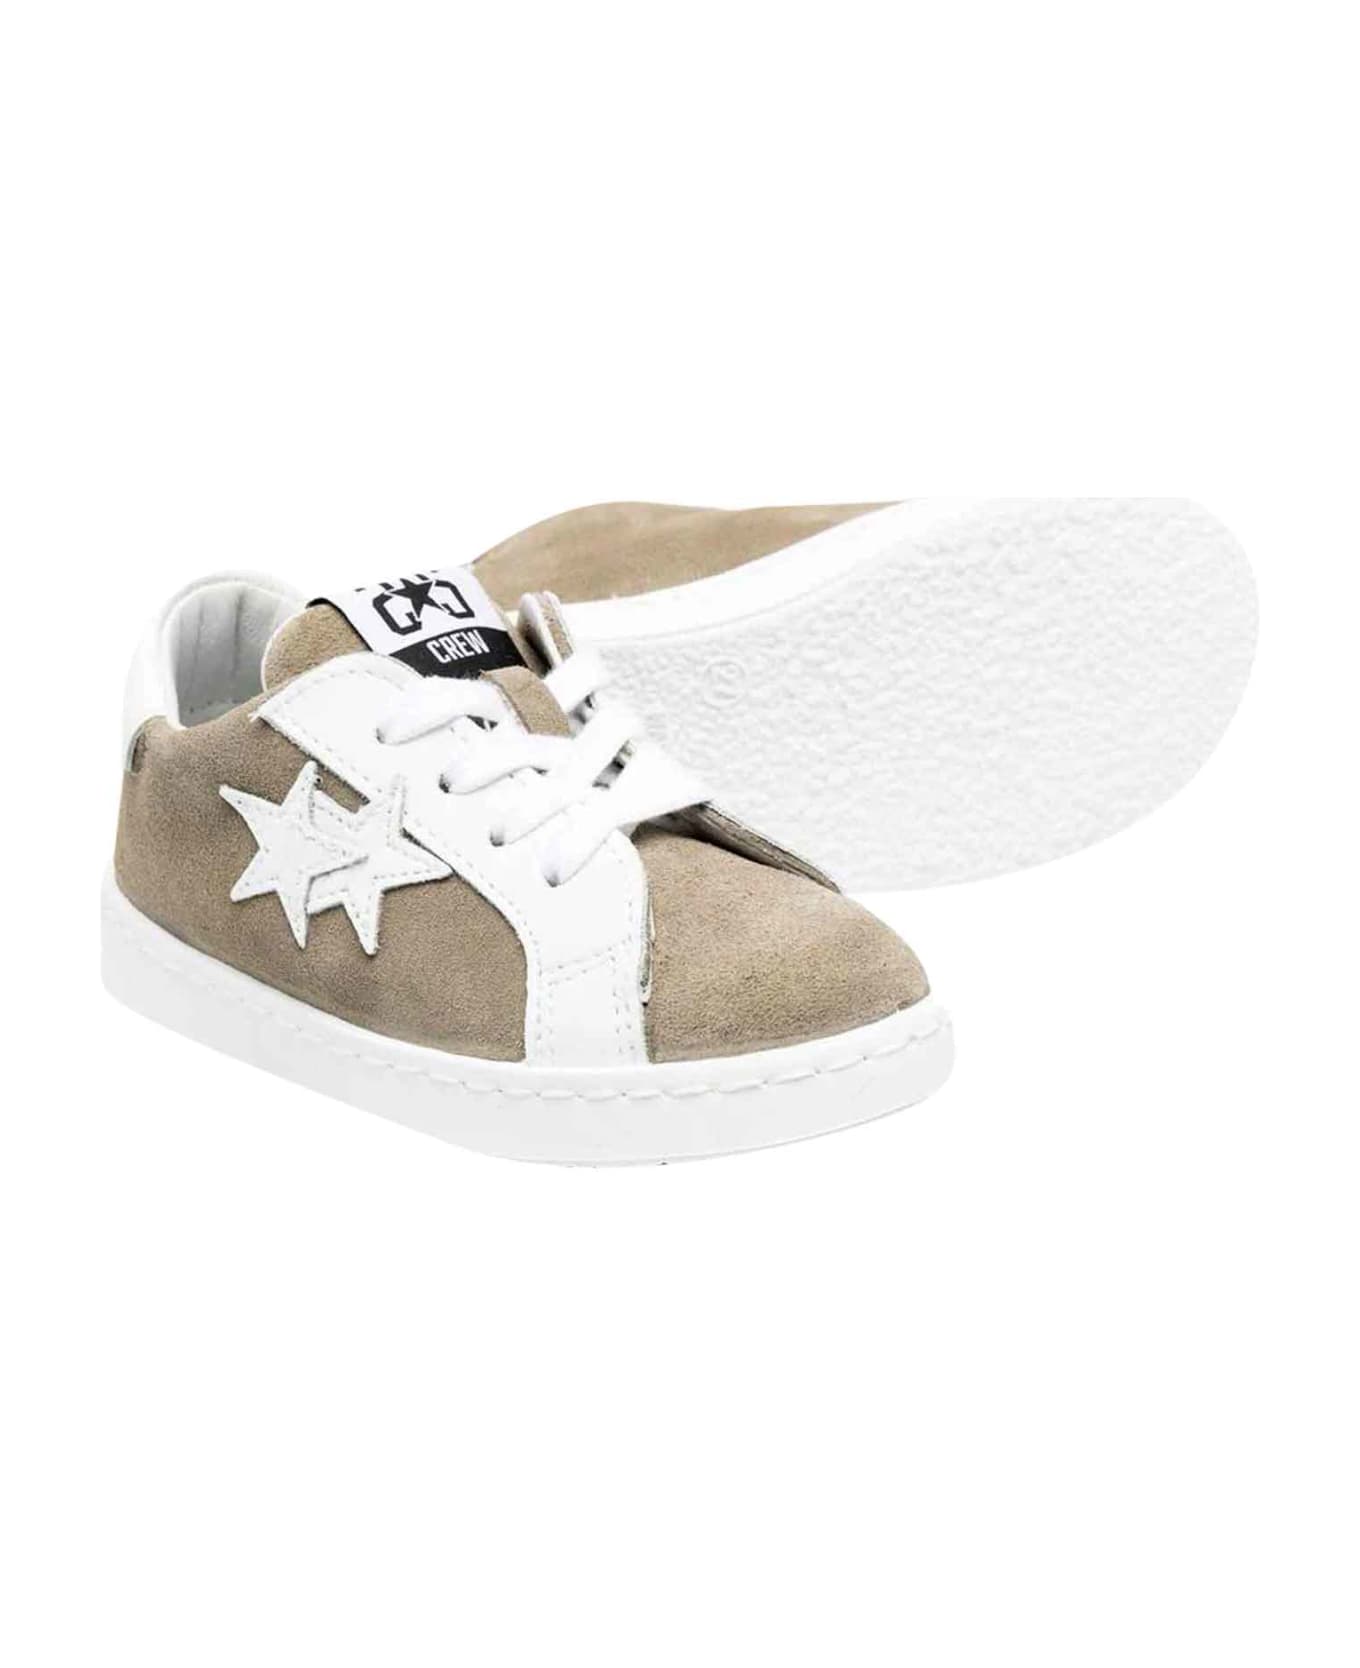 2Star Sneakers With 2star Application - Verde/bianco